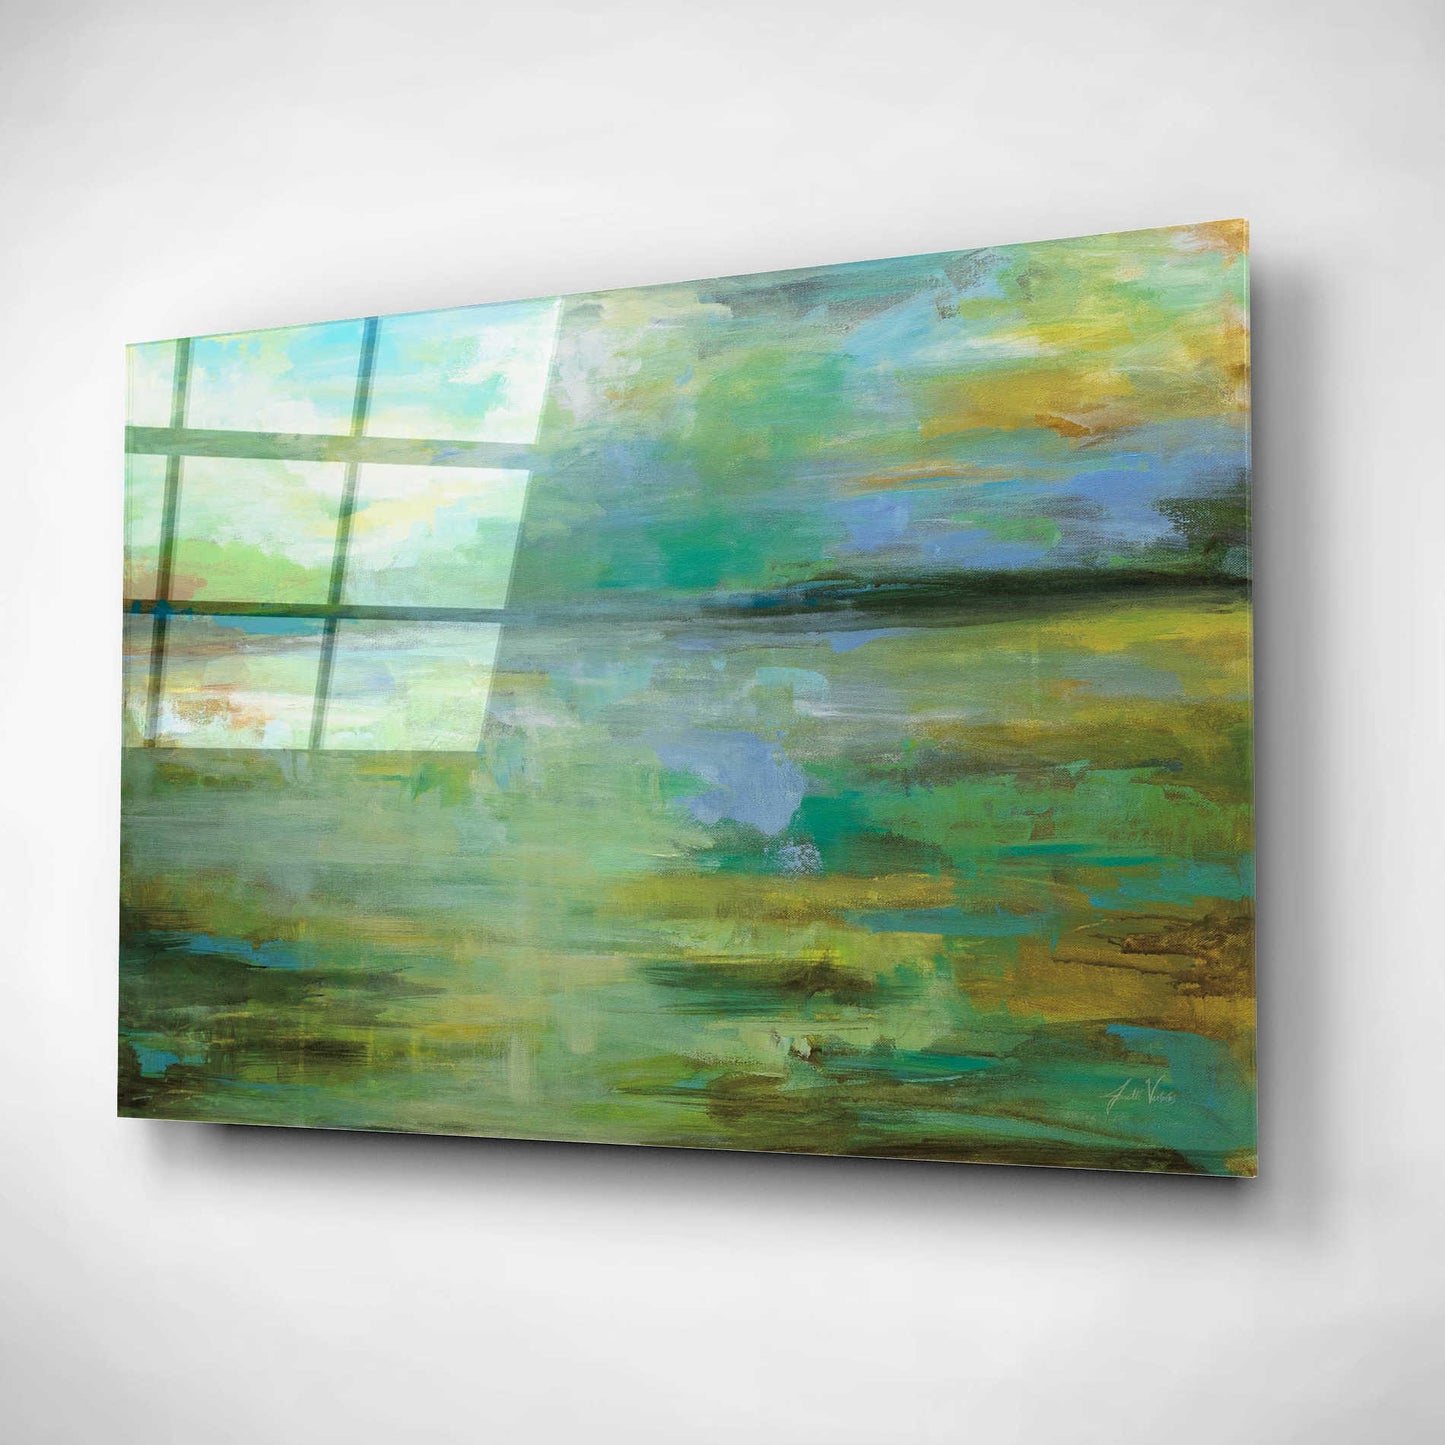 Epic Art 'Calm' by Jeanette Vertentes, Acrylic Glass Wall Art,16x12